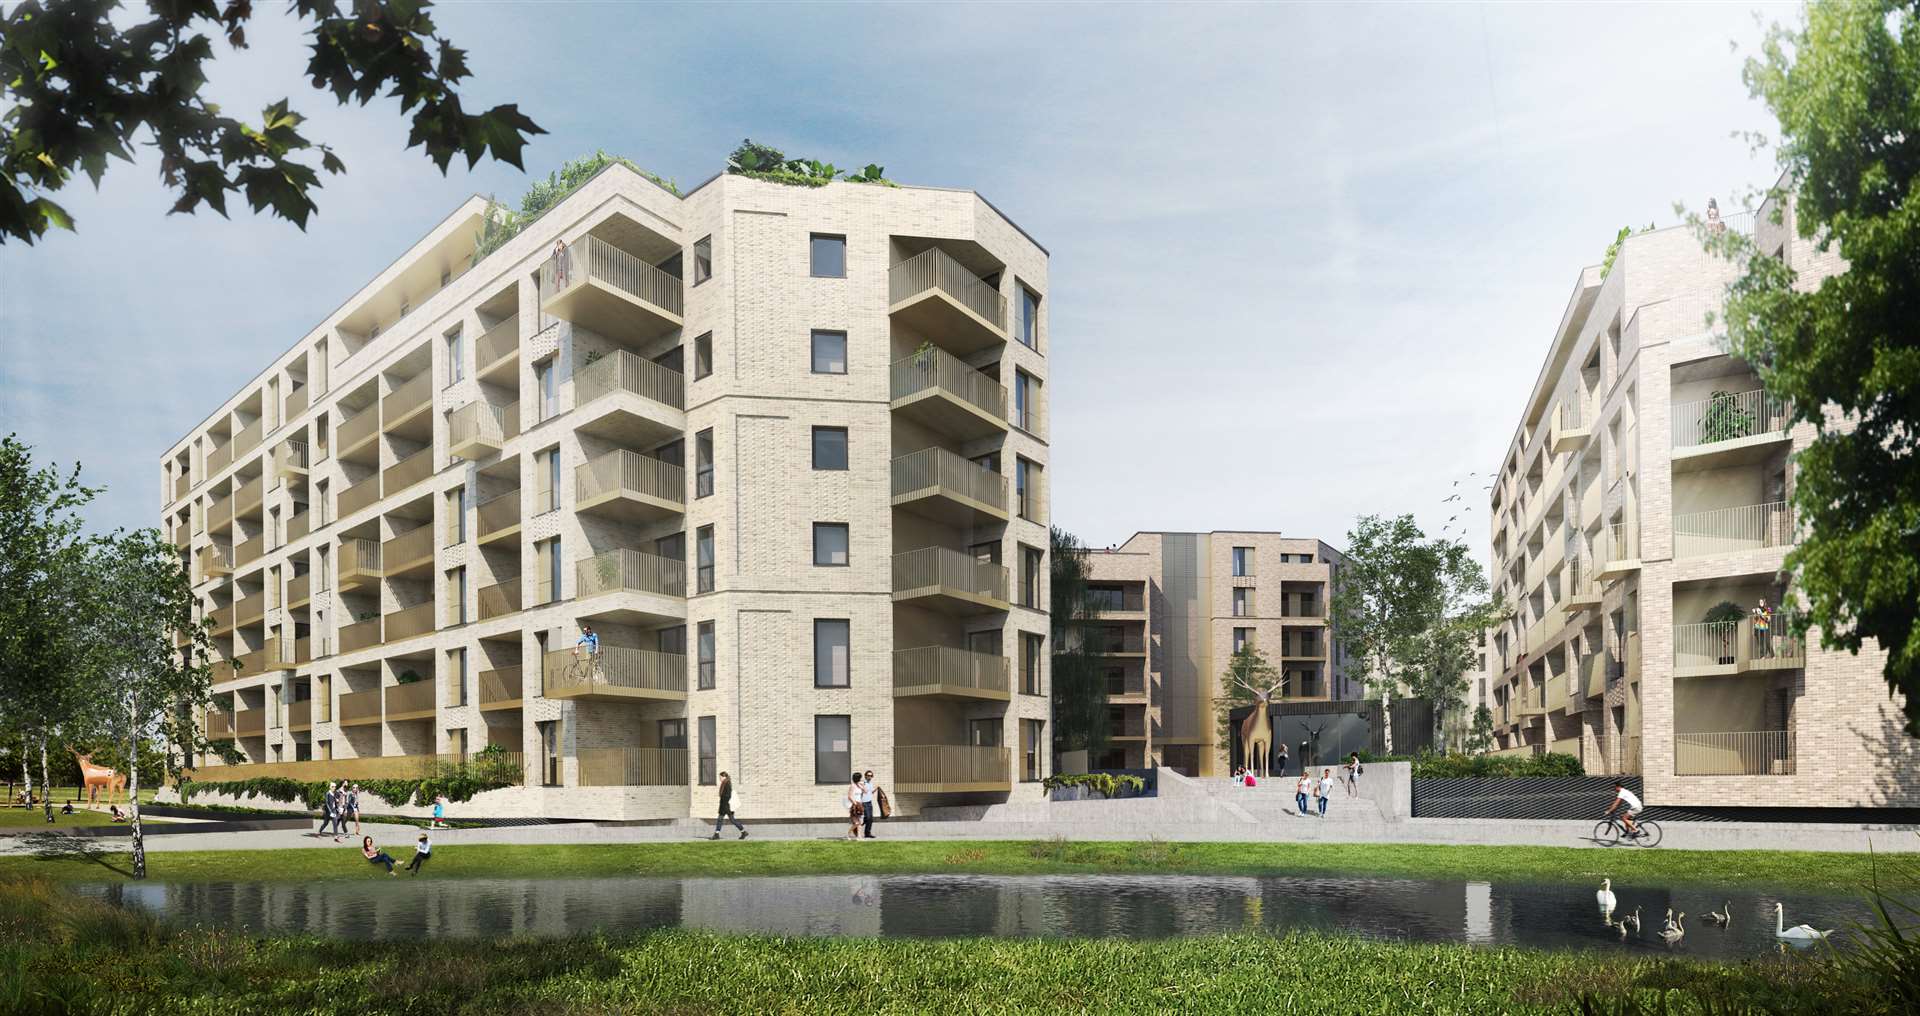 Plans for 660 homes in Ashford have been approved